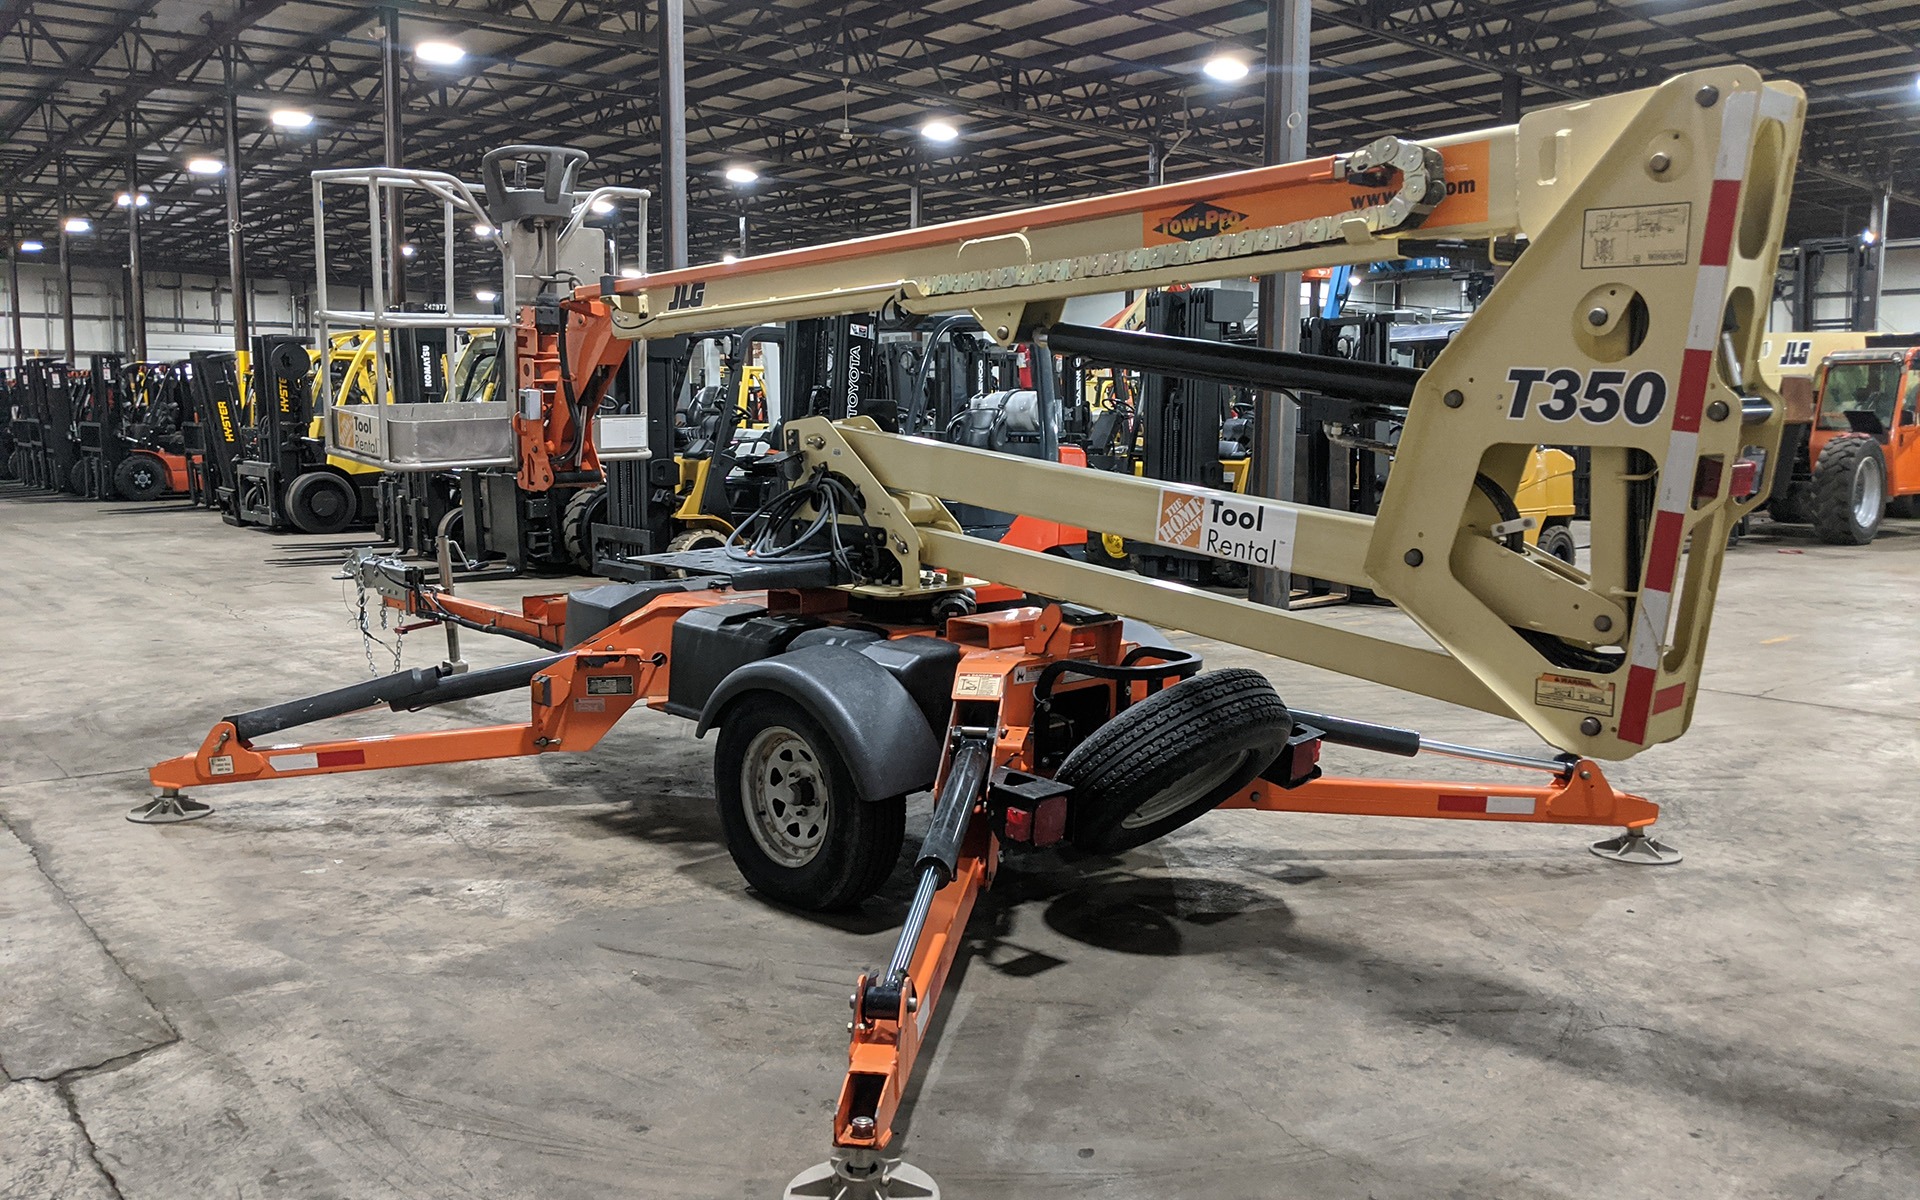 Used 2013 JLG T350  | Cary, IL